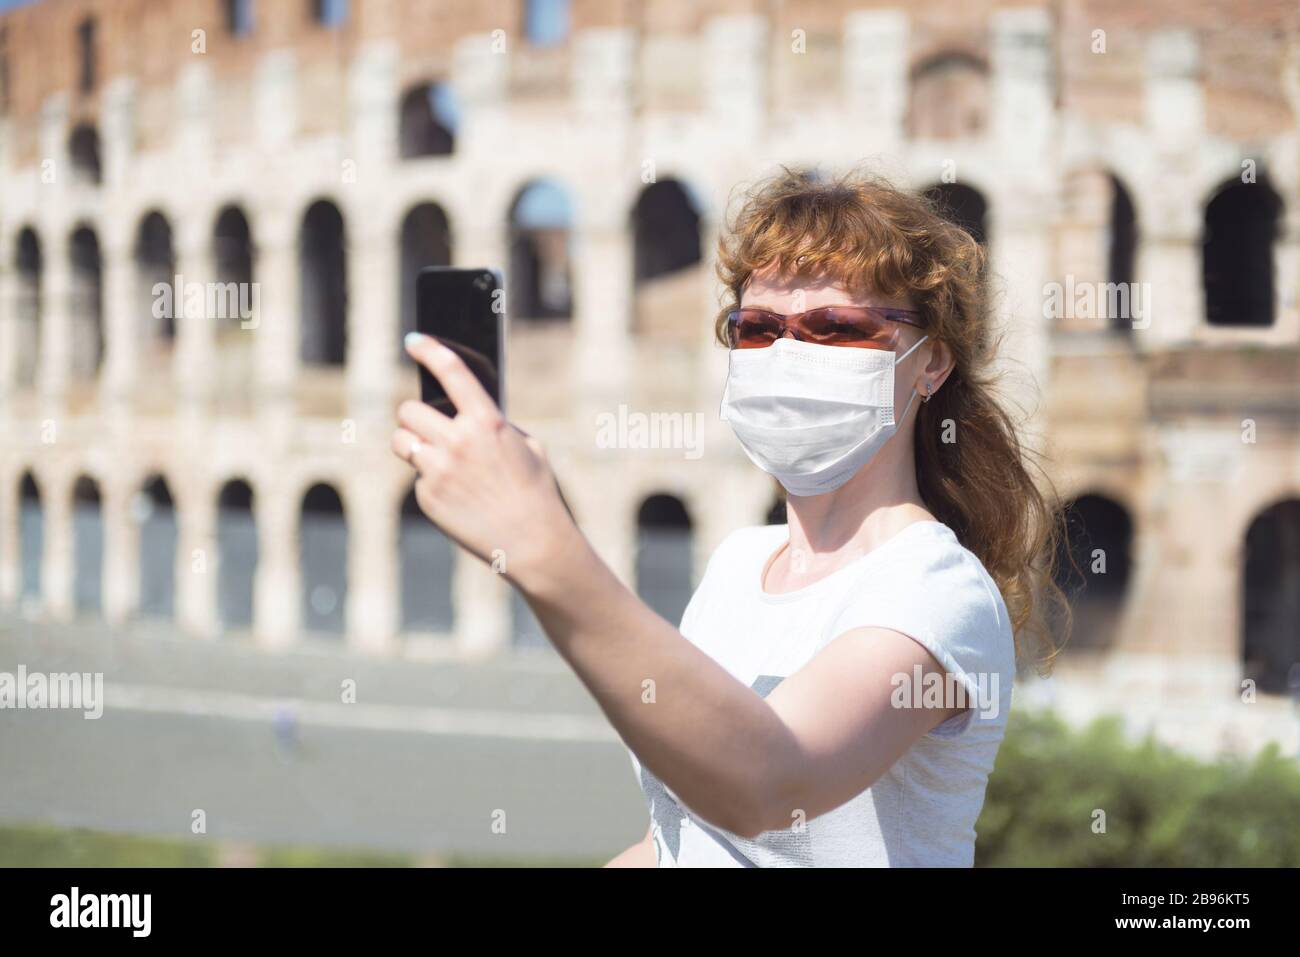 COVID-19 coronavirus in Italy, woman in protective mask makes selfie by empty Coliseum in Rome. Tourist landmarks closed due to corona virus outbreak. Stock Photo